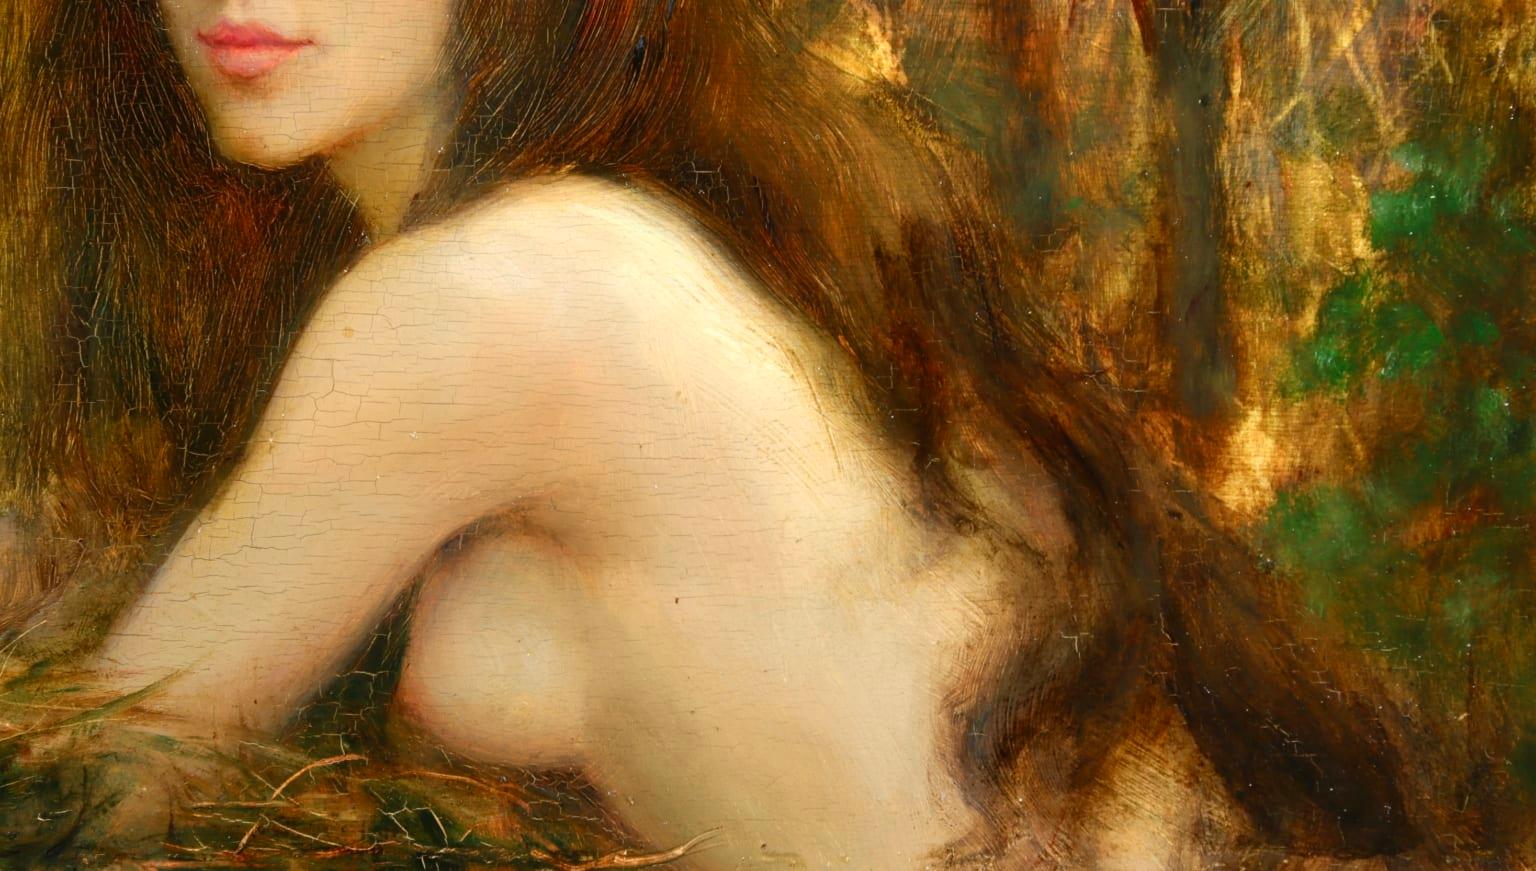 A beautiful oil on panel by French portrait painter Leon Printemps depicting the head and shoulders portrait of a nude nymph in a forest. Her long brunette hair flows down her back and her blue eyes are staring into the distance.

Signature:
Signed